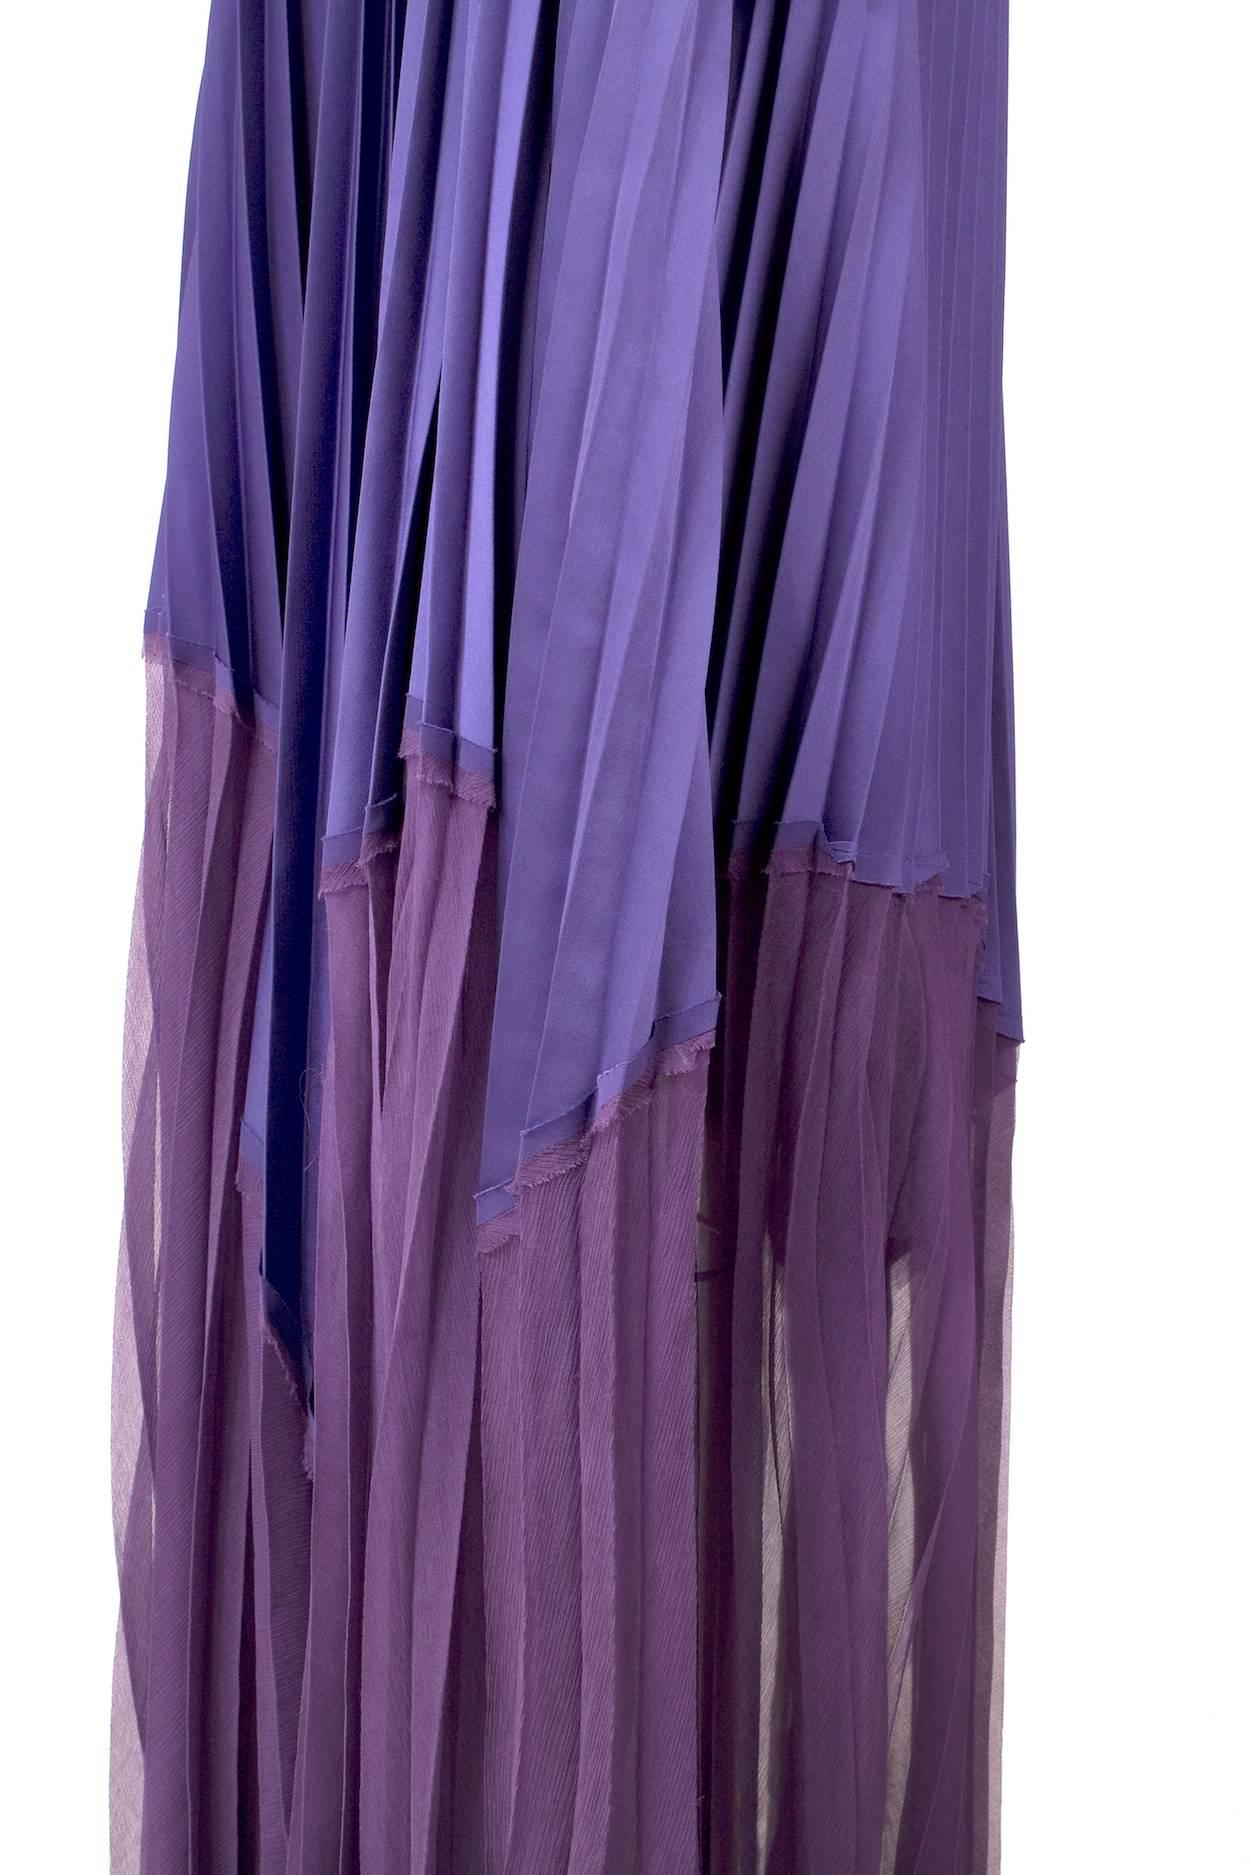 Jean Paul Gaultier Sleeveless Dress with Bow and Pleated Skirt circa 1990s In Good Condition In Los Angeles, CA